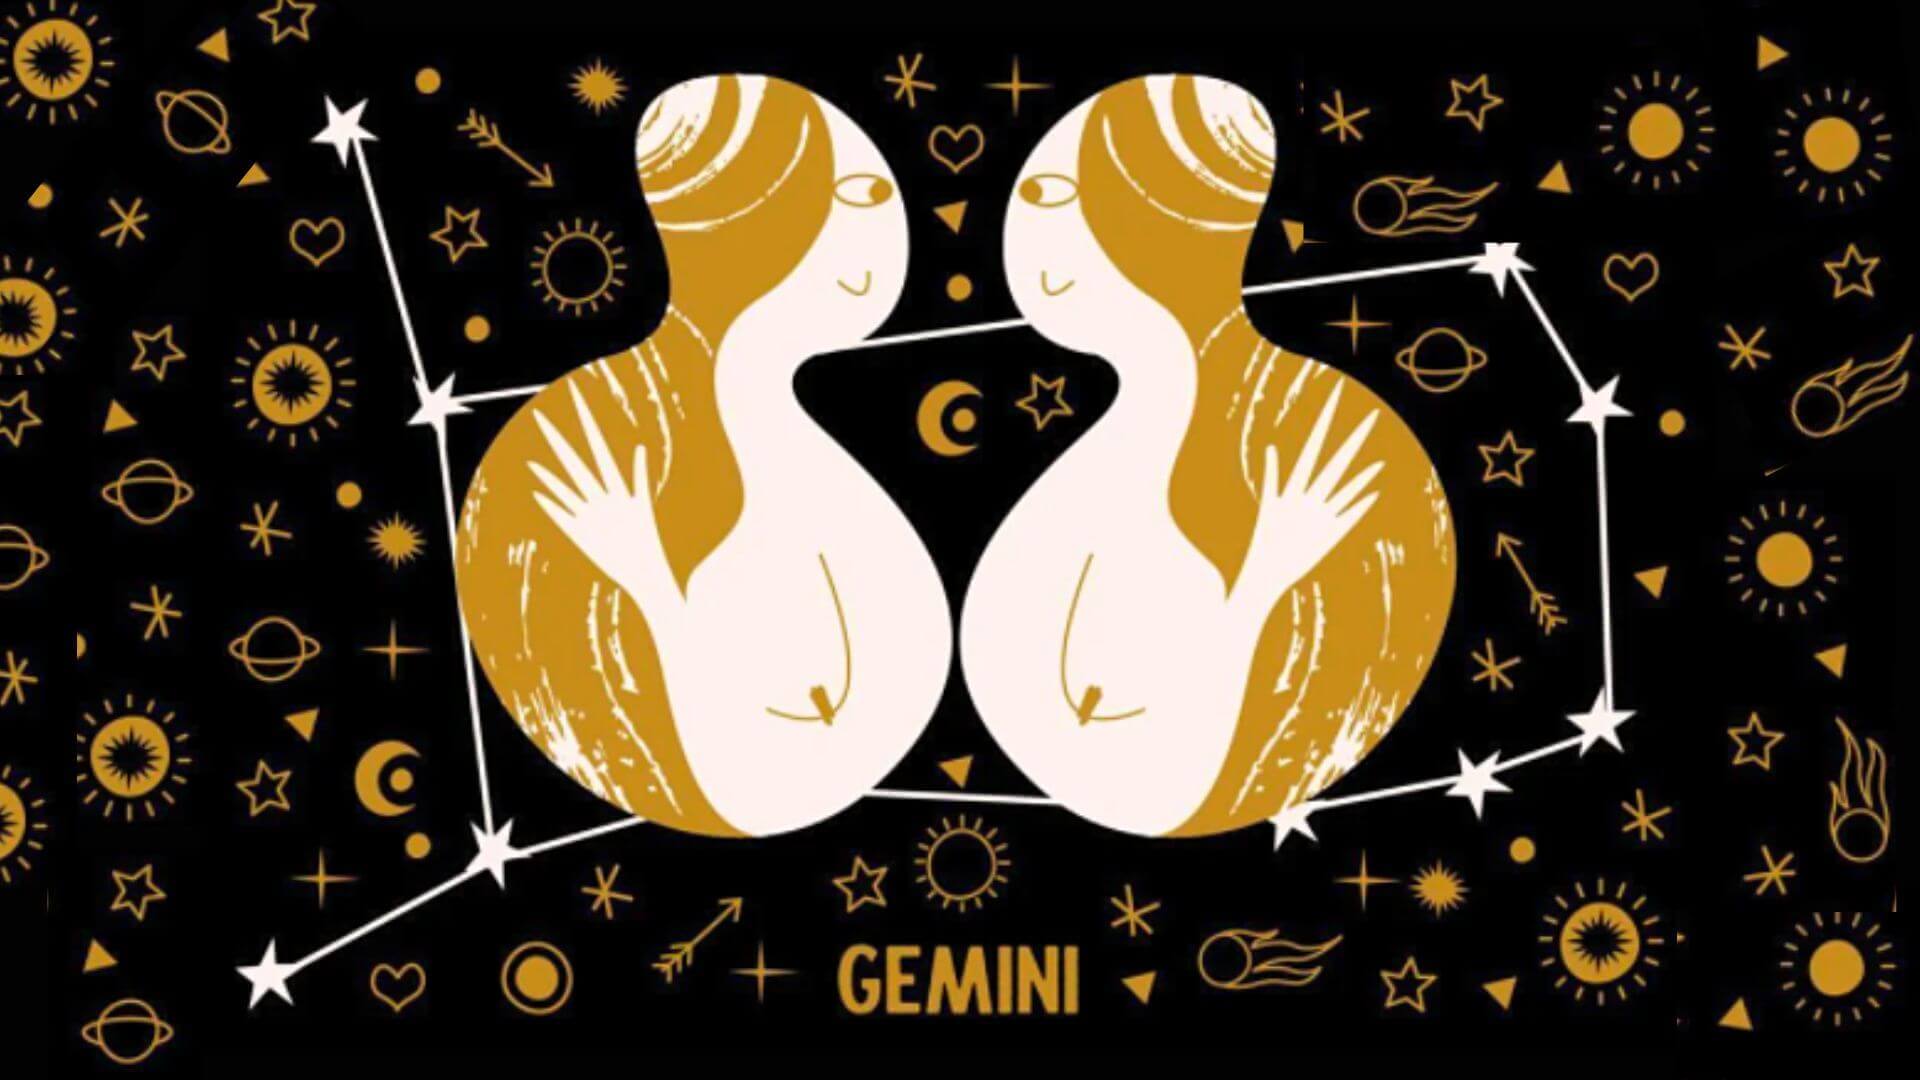 Gemini Horoscope 2022: Astrological Predictions For This Year